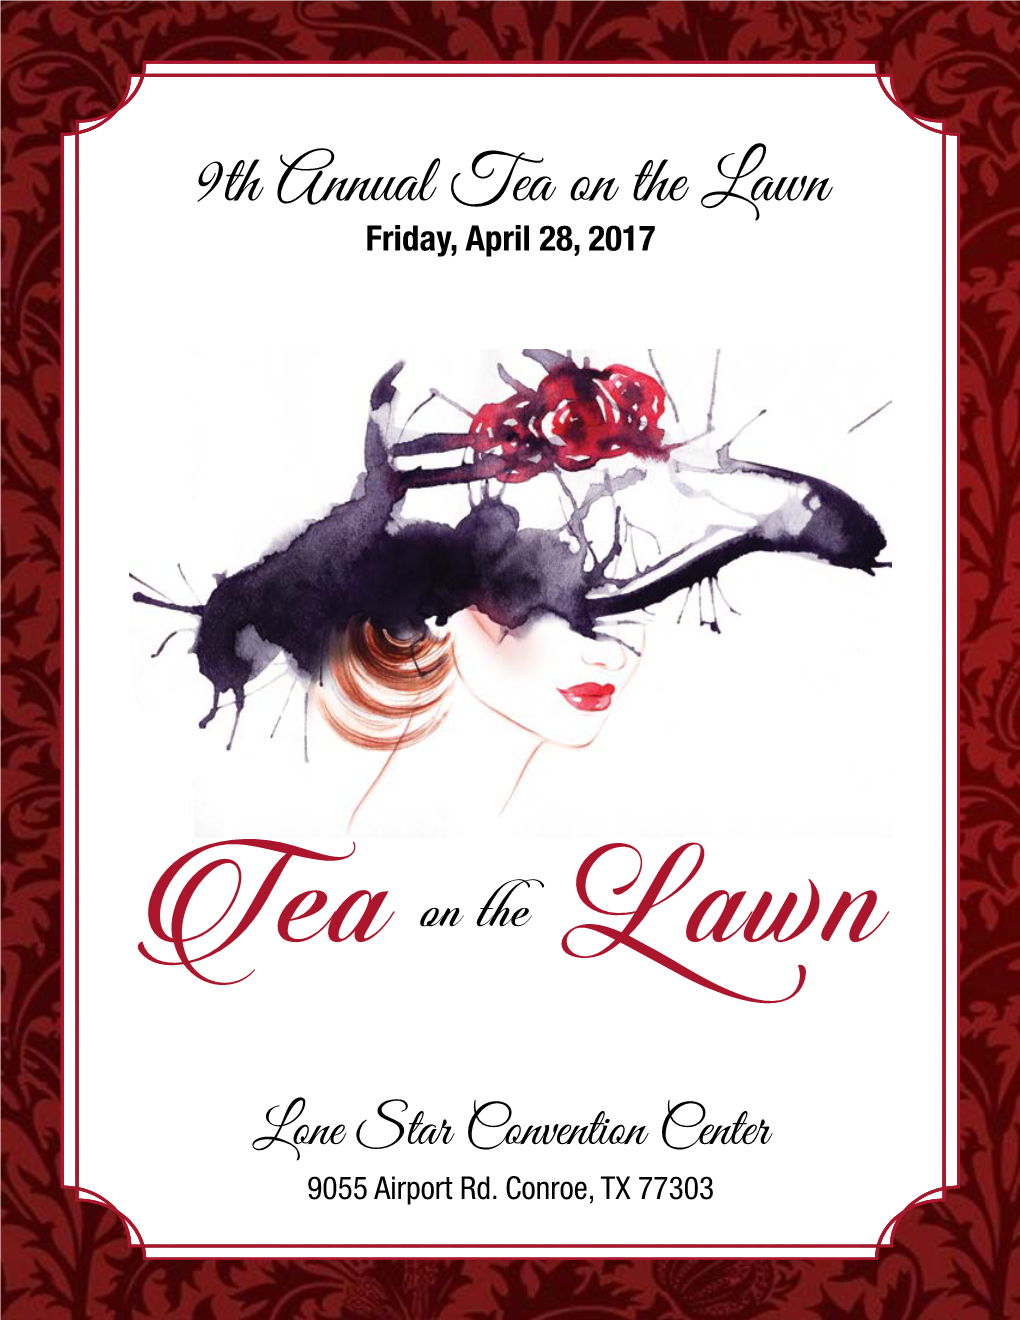 Mira Sorvino As Our Guest Speaker at the 9Th Annual Tea on the Lawn